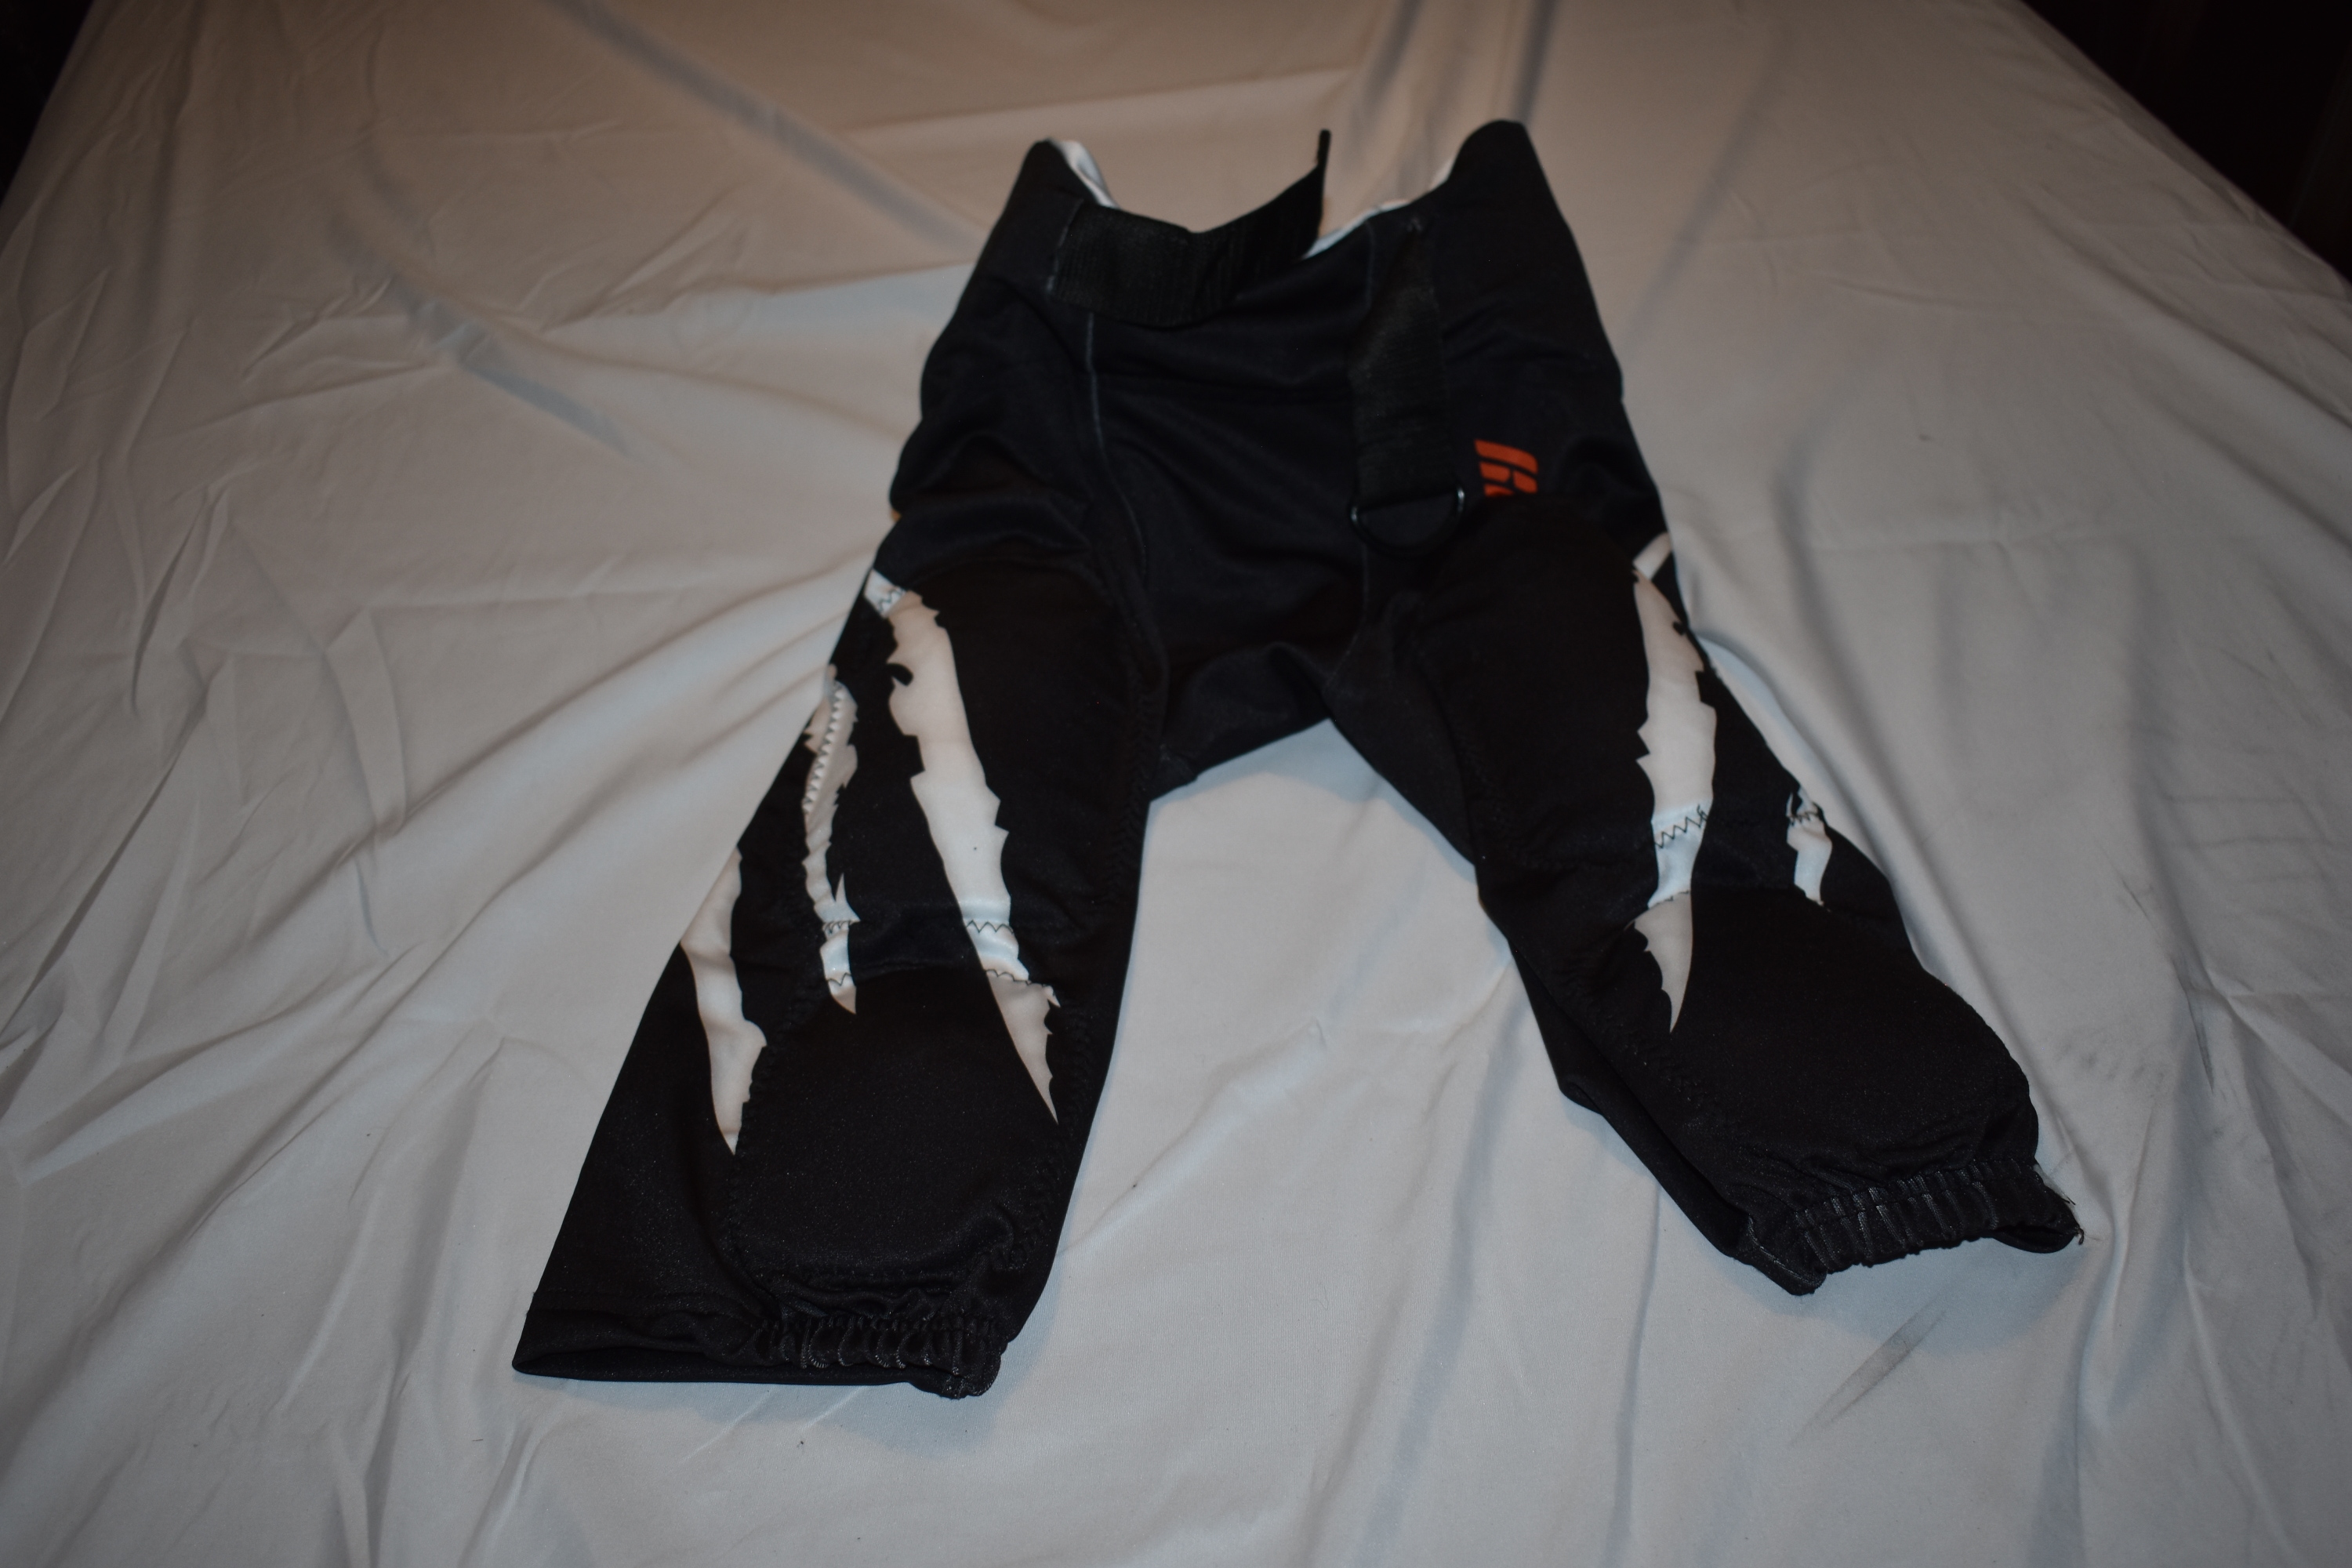 Integrated Youth Football Pants, Black/White, Youth Large - Top Condition!